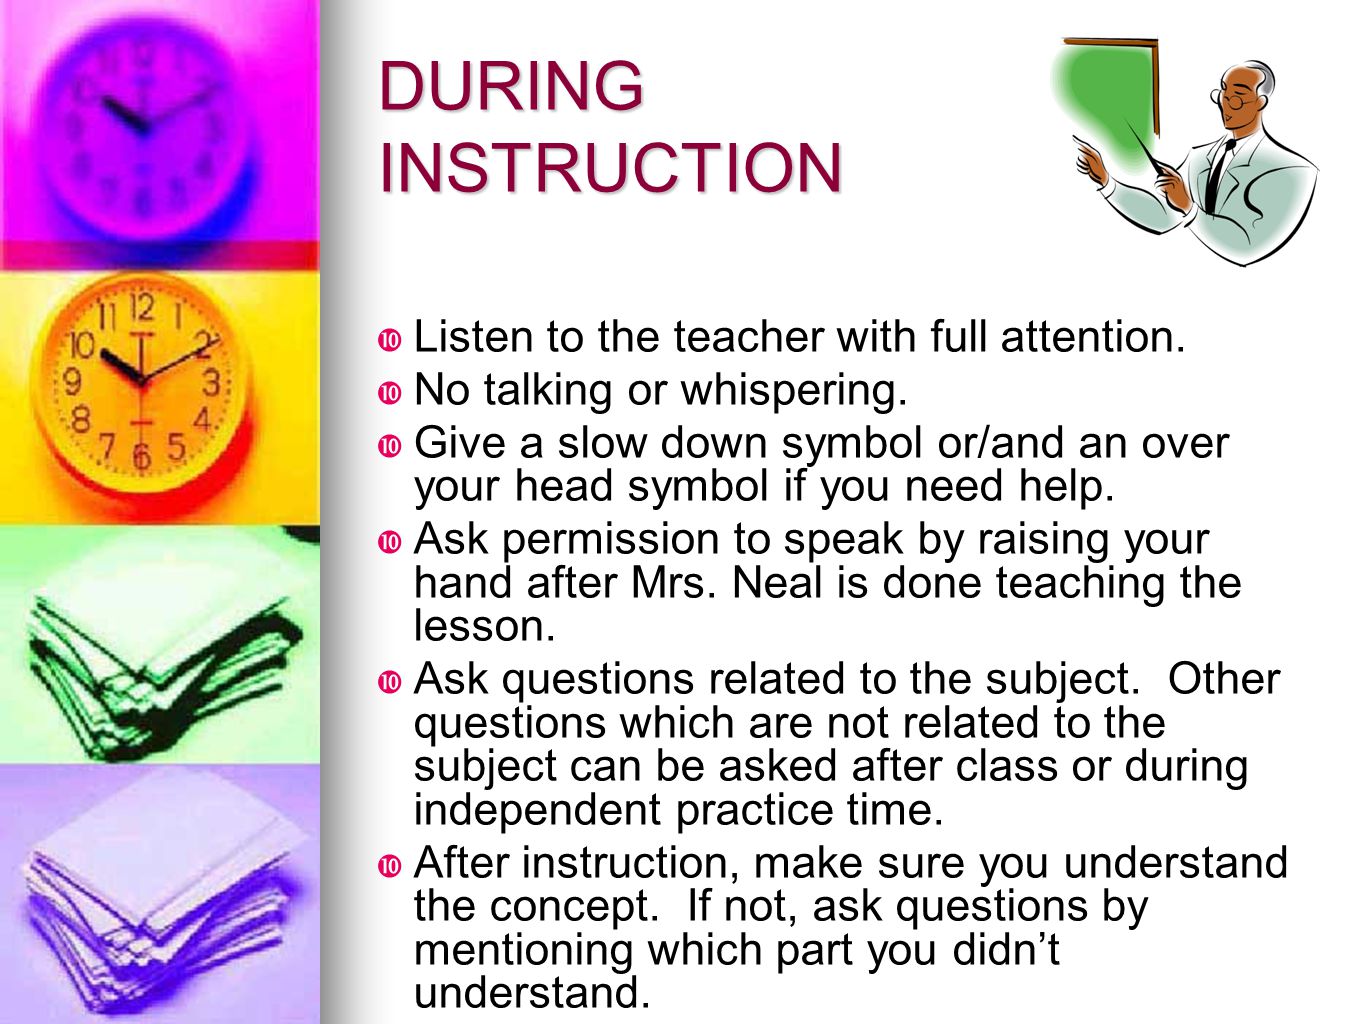 DURING INSTRUCTION Listen to the teacher with full attention.